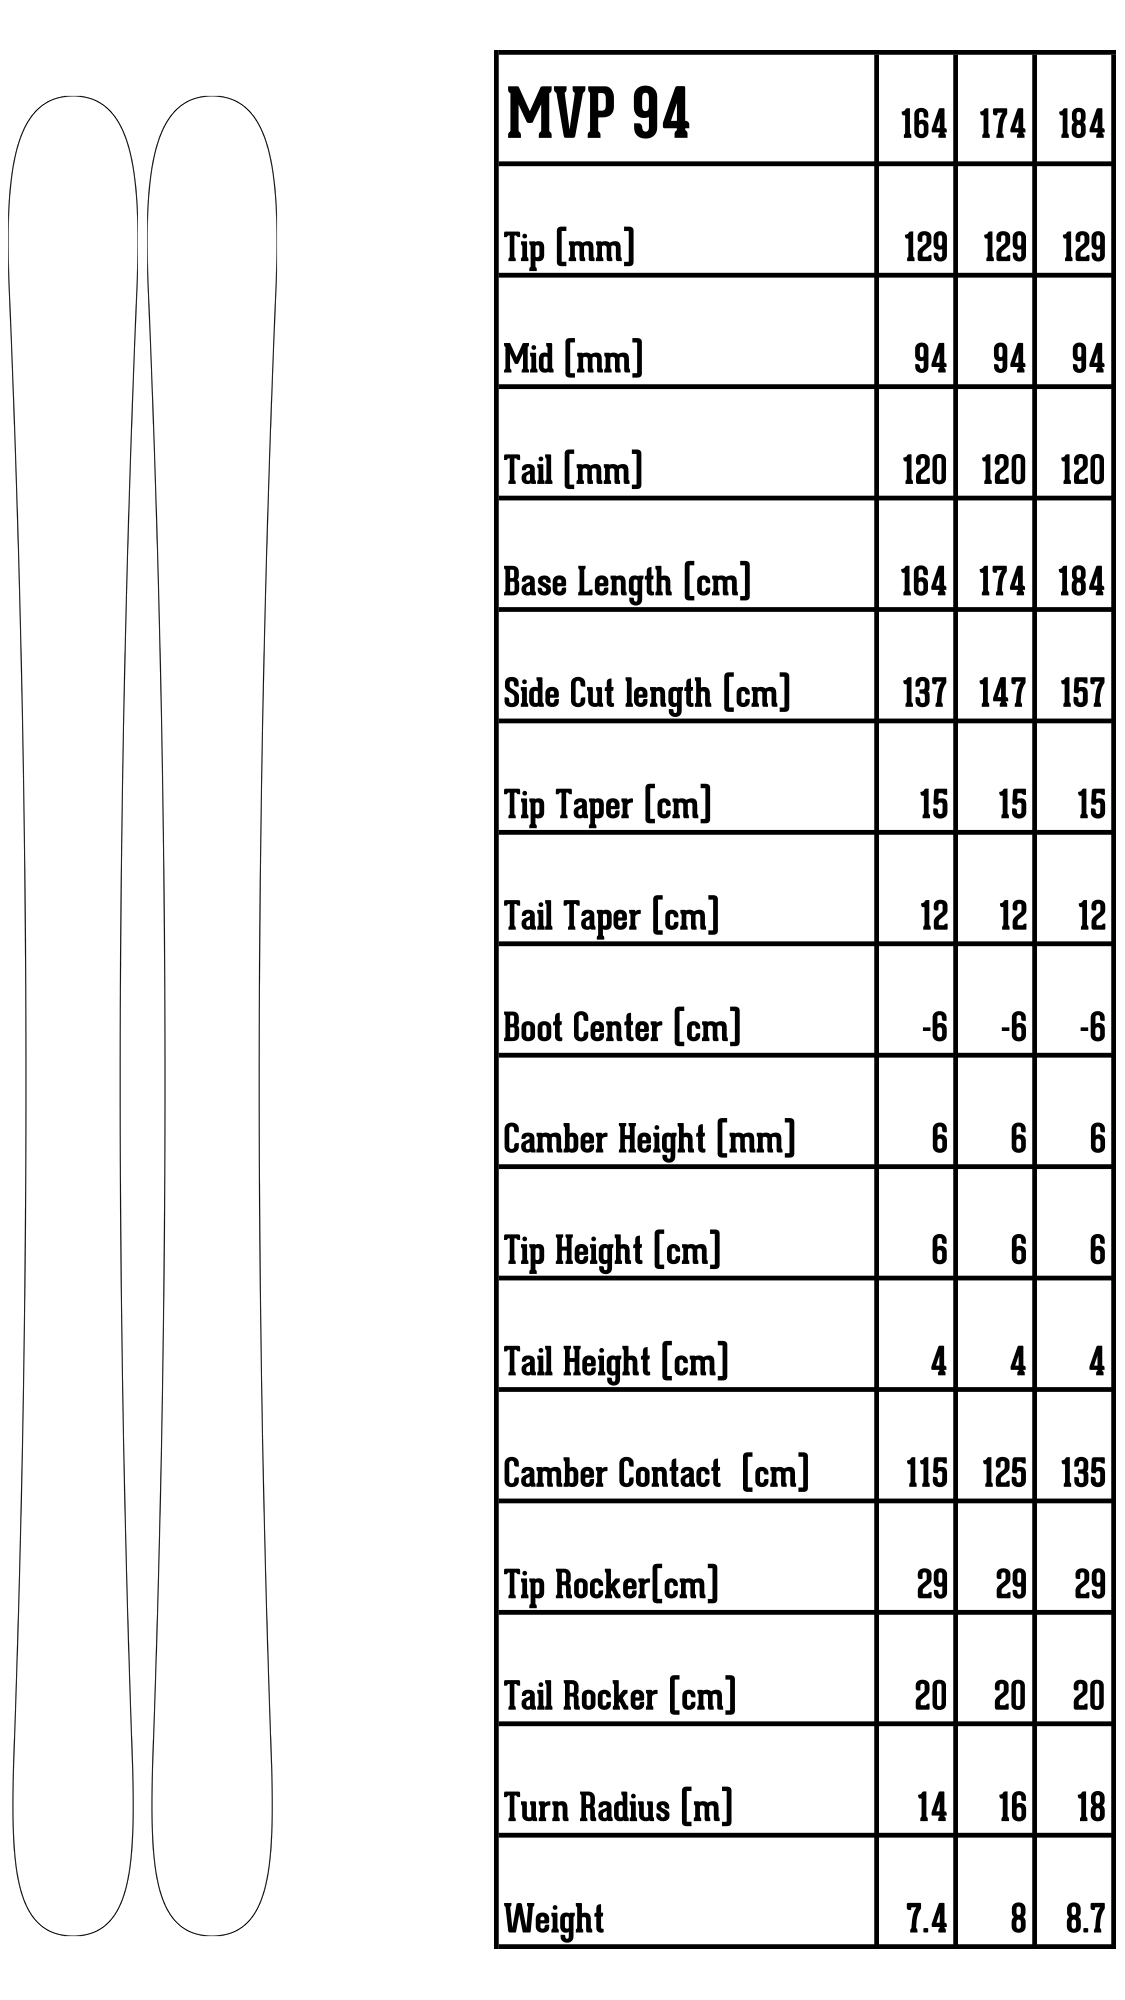 MVP 94 ski spec chart showing weights dimensions rocker and camber